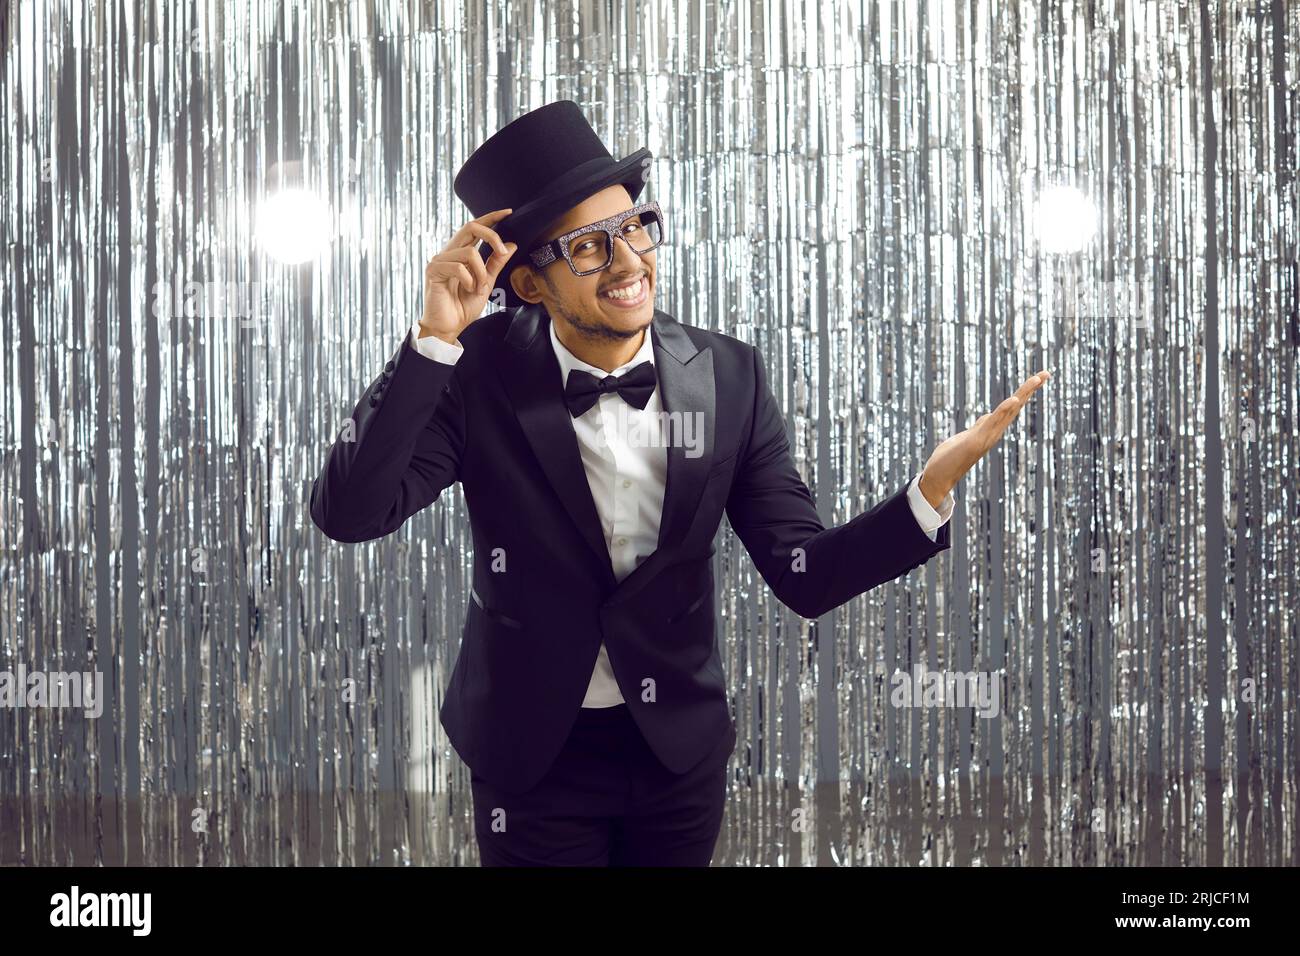 Portrait of positive young dark-skinned man who politely greets you holding on to his top hat. Stock Photo